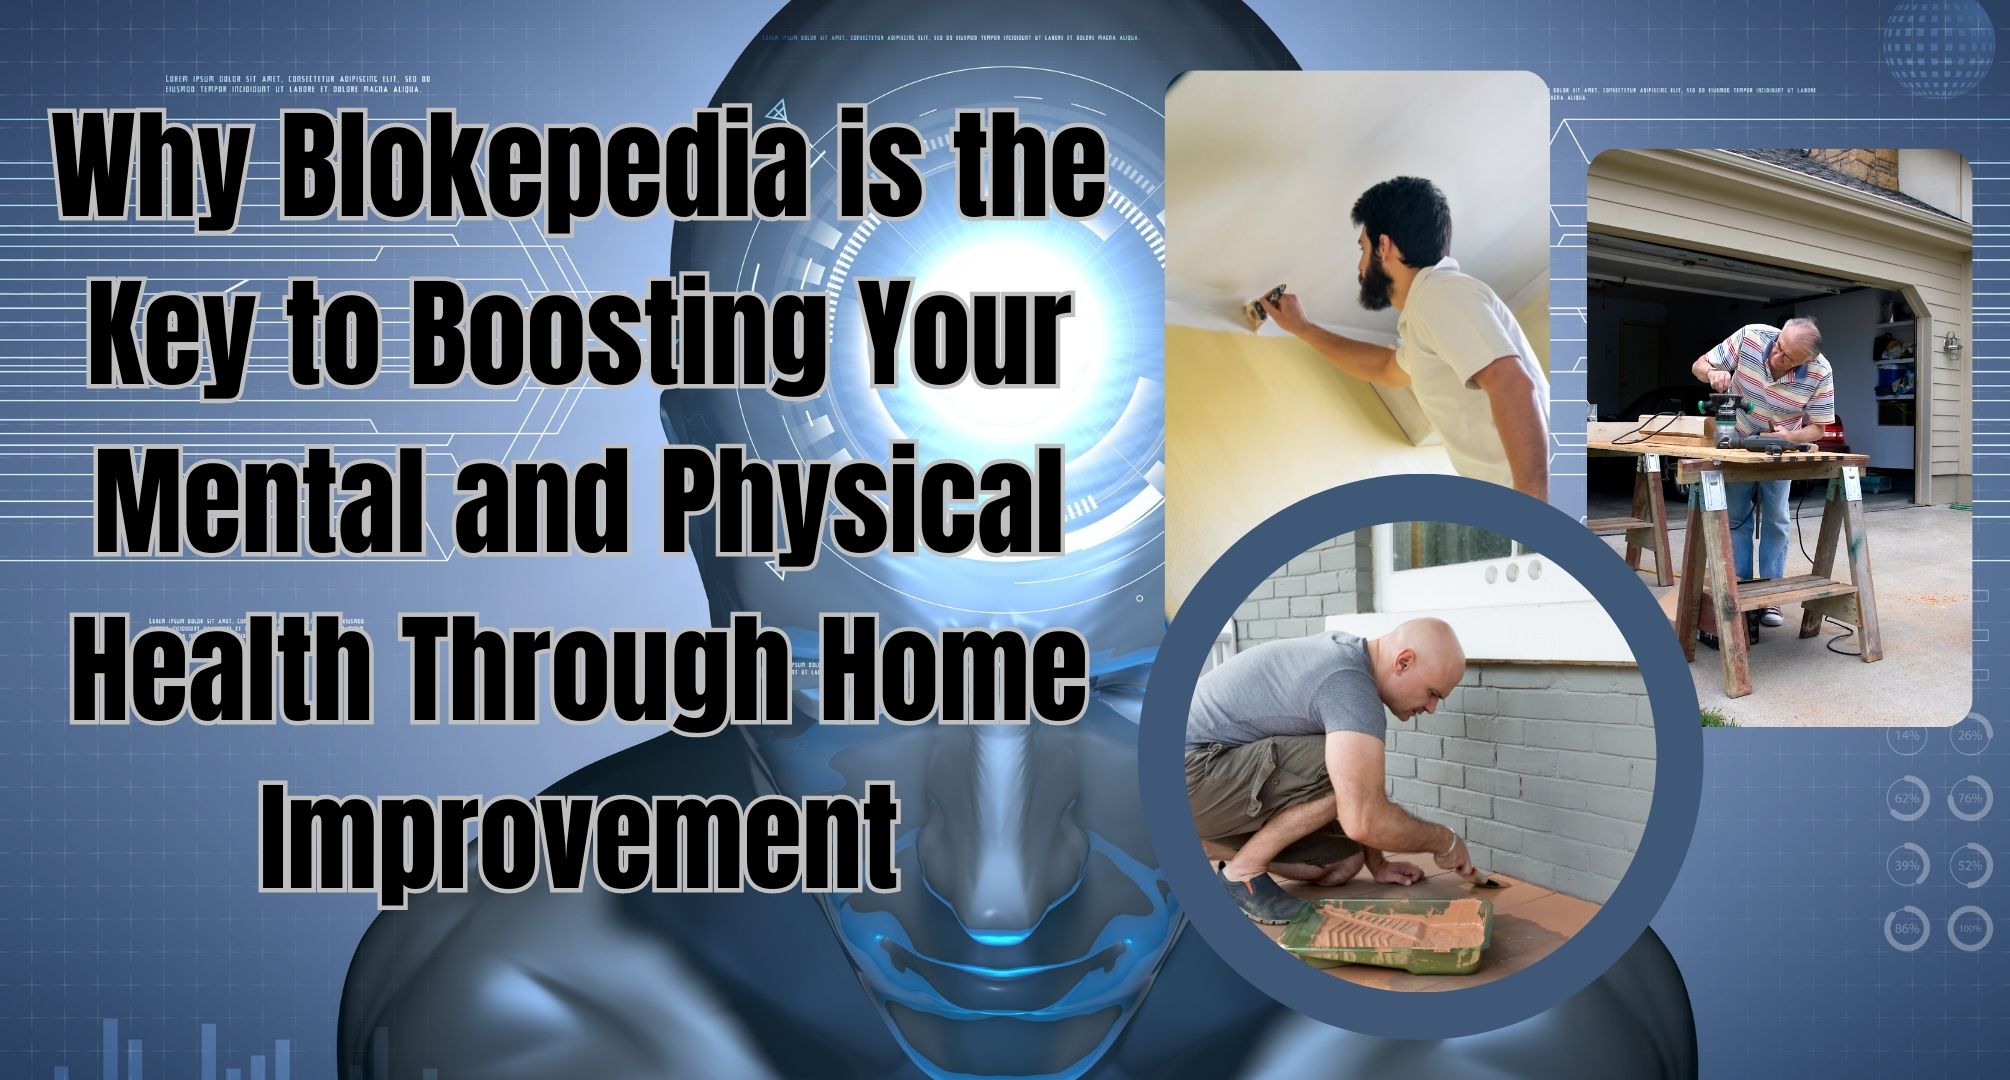 Why Blokepedia is the Key to Boosting Your Mental and Physical Health Through Home Improvement